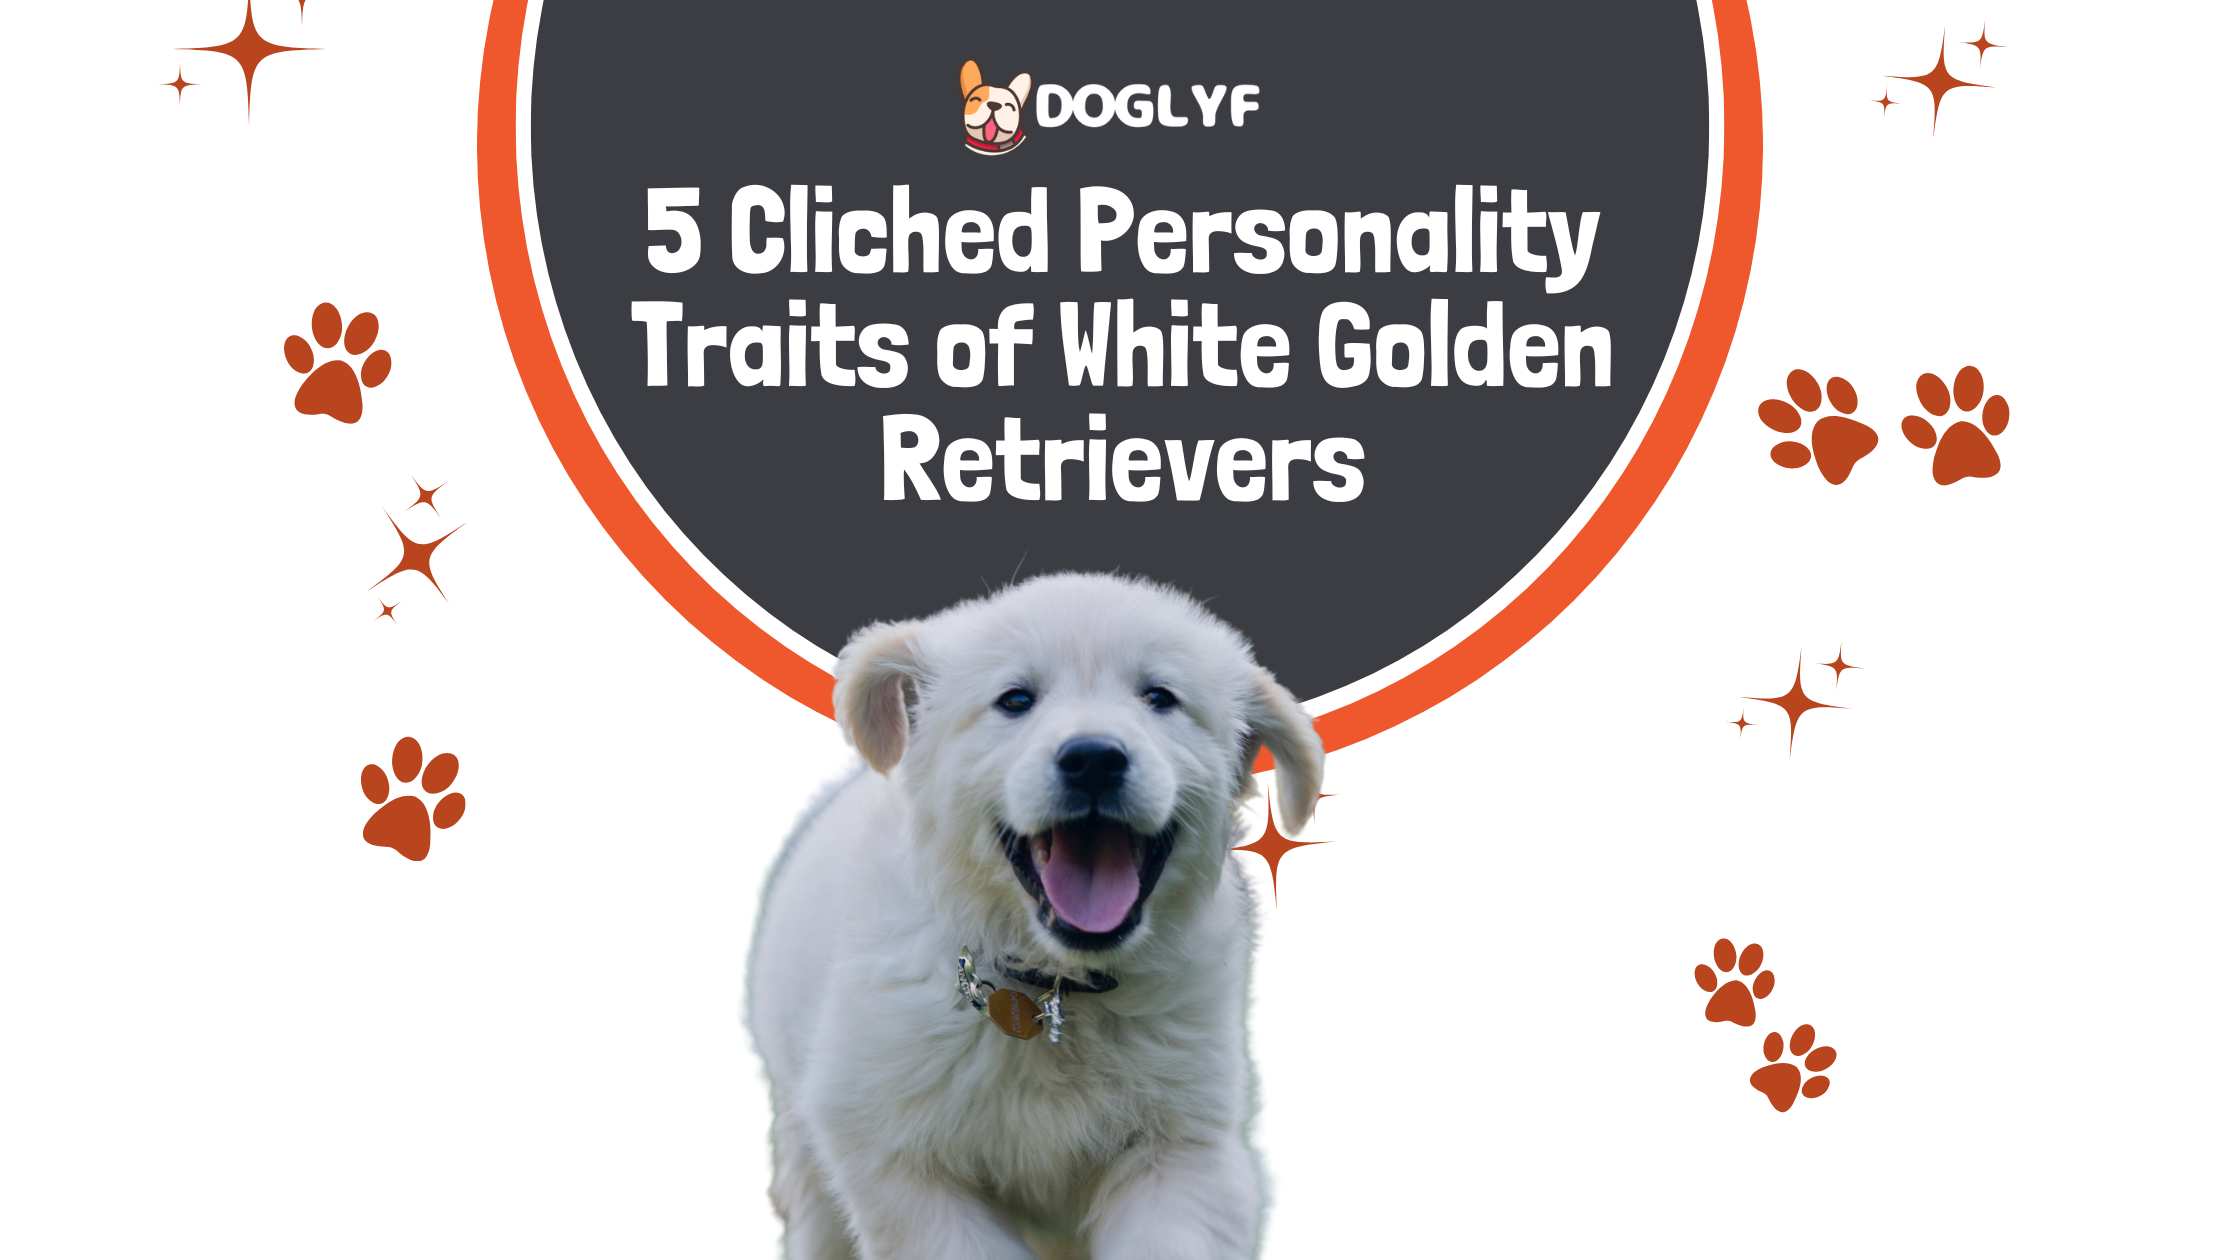 Beyond the Fluff: Exploring 5 Cliched Personality Traits of White Golden Retrievers